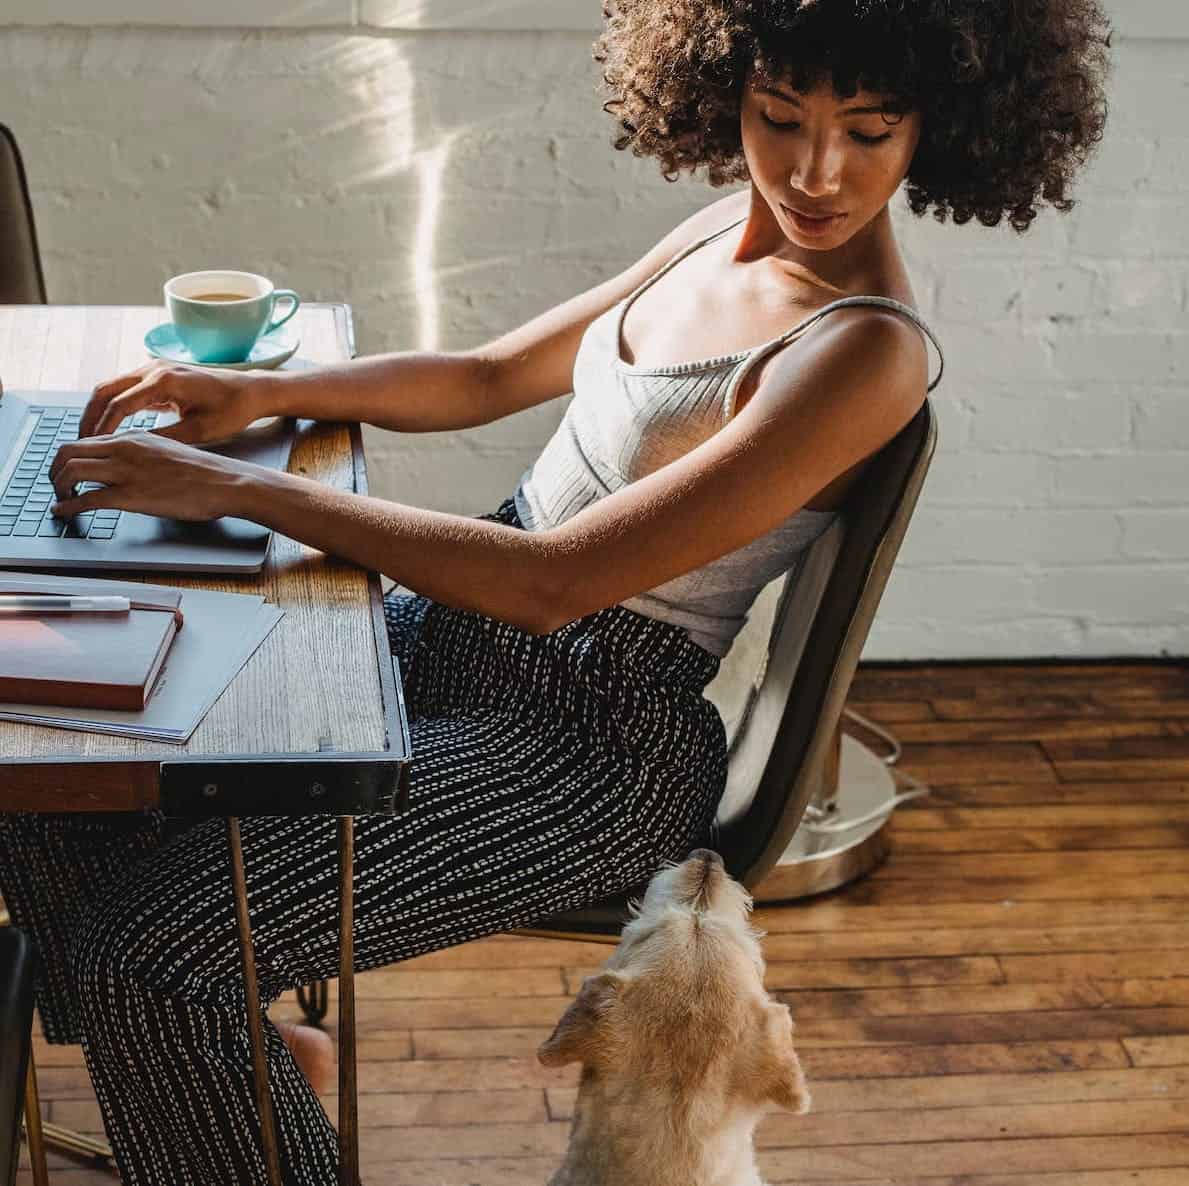 A photo of a woman staring at a dog while working on her laptop